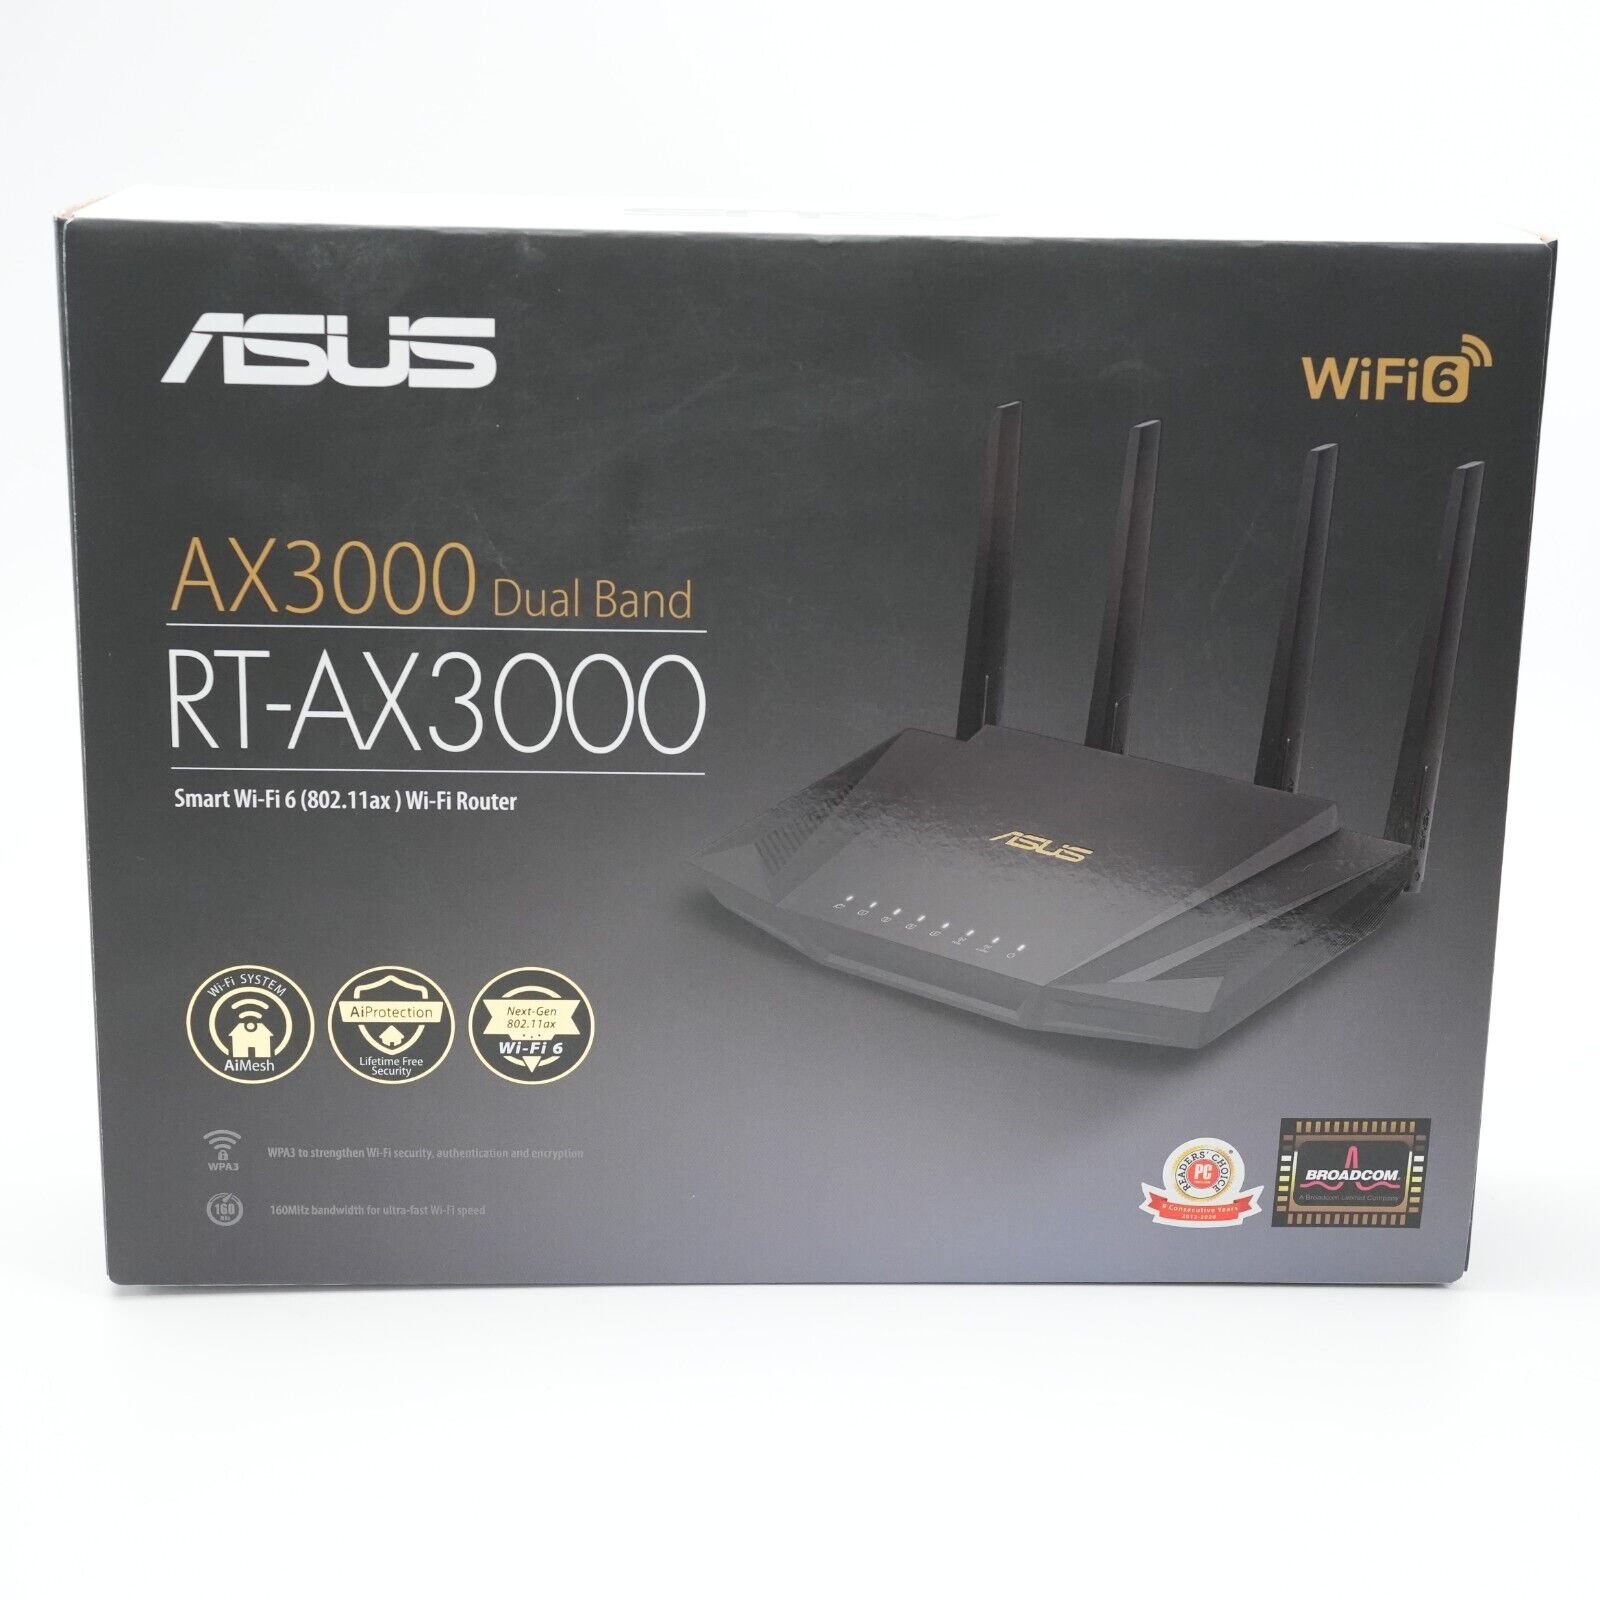 ASUS RT-AX3000 Dual Band WiFi Router, WiFi 6, 802.11ax, gaming router